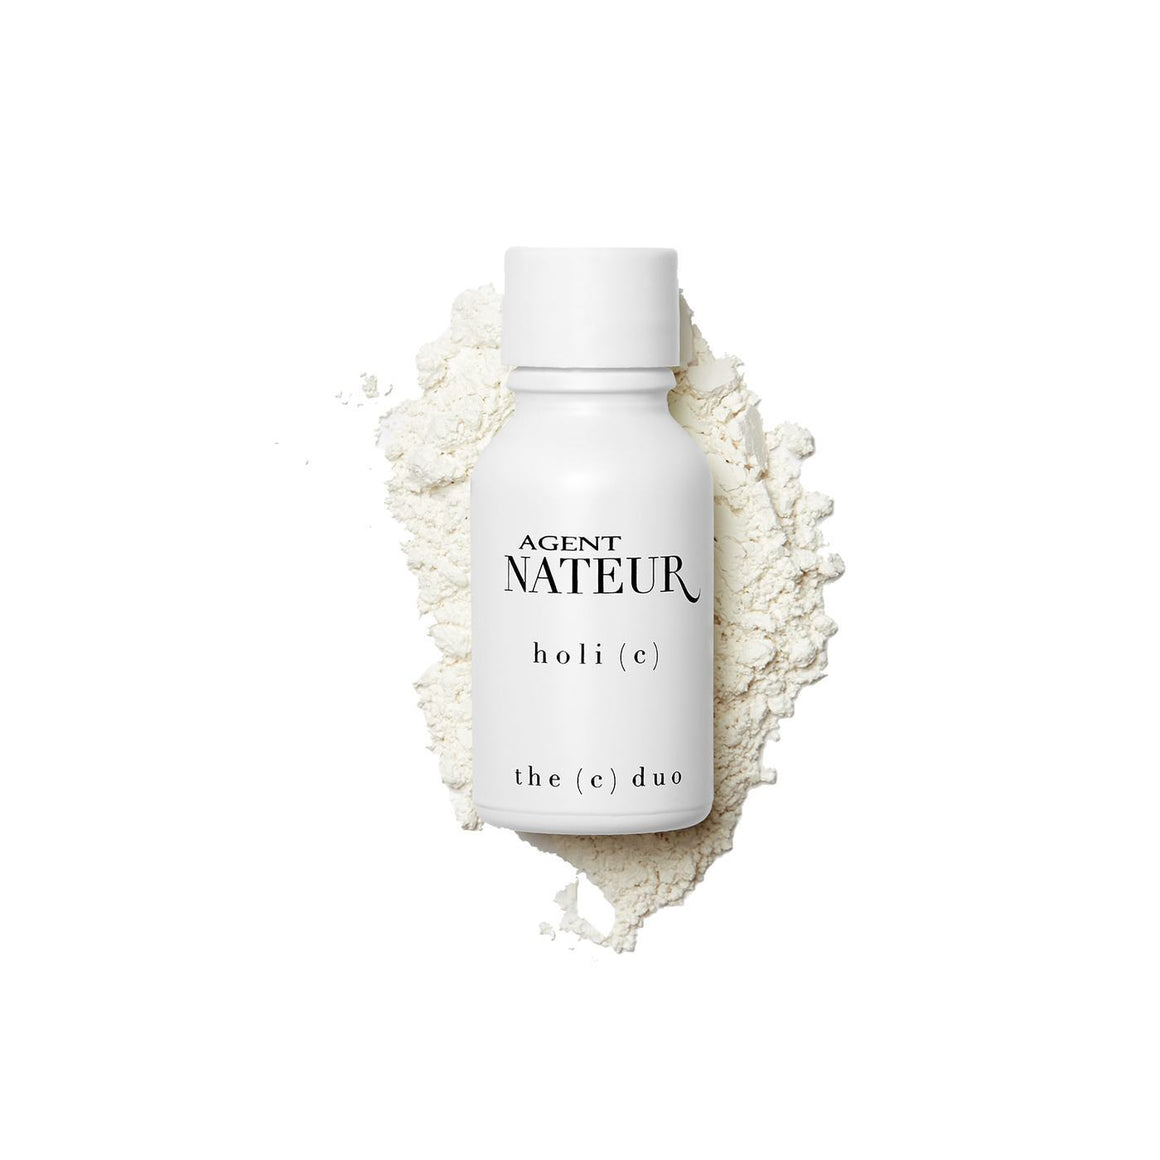 Vitamin C Powder for Skin by Agent Nateur